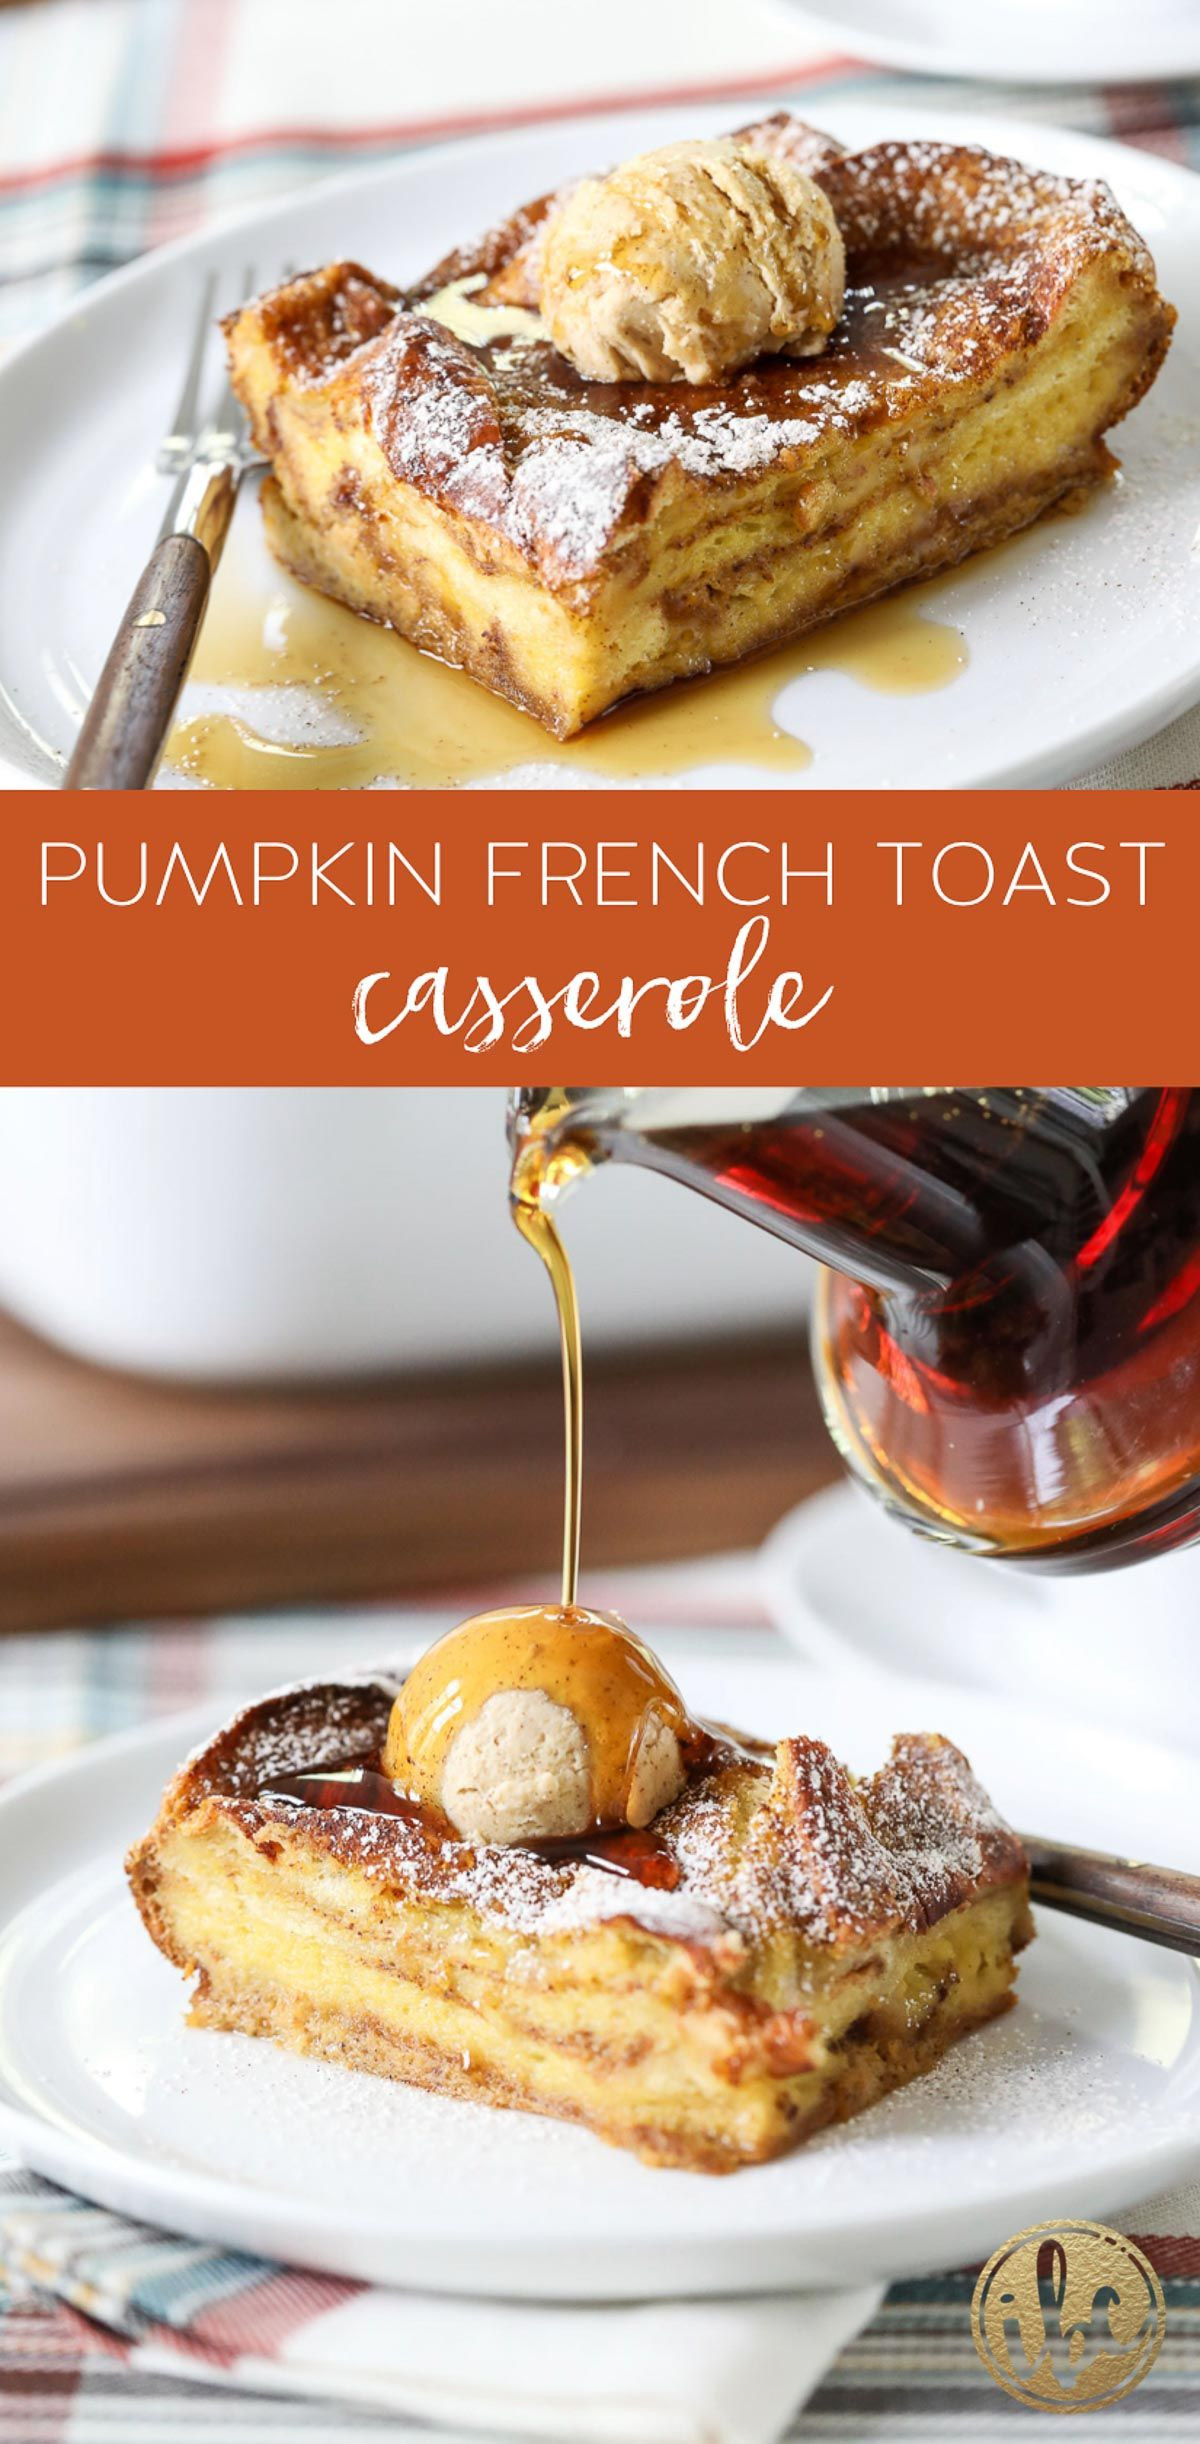 French Toast Casserole Tasty
 This overnight Pumpkin French Toast Casserole is a